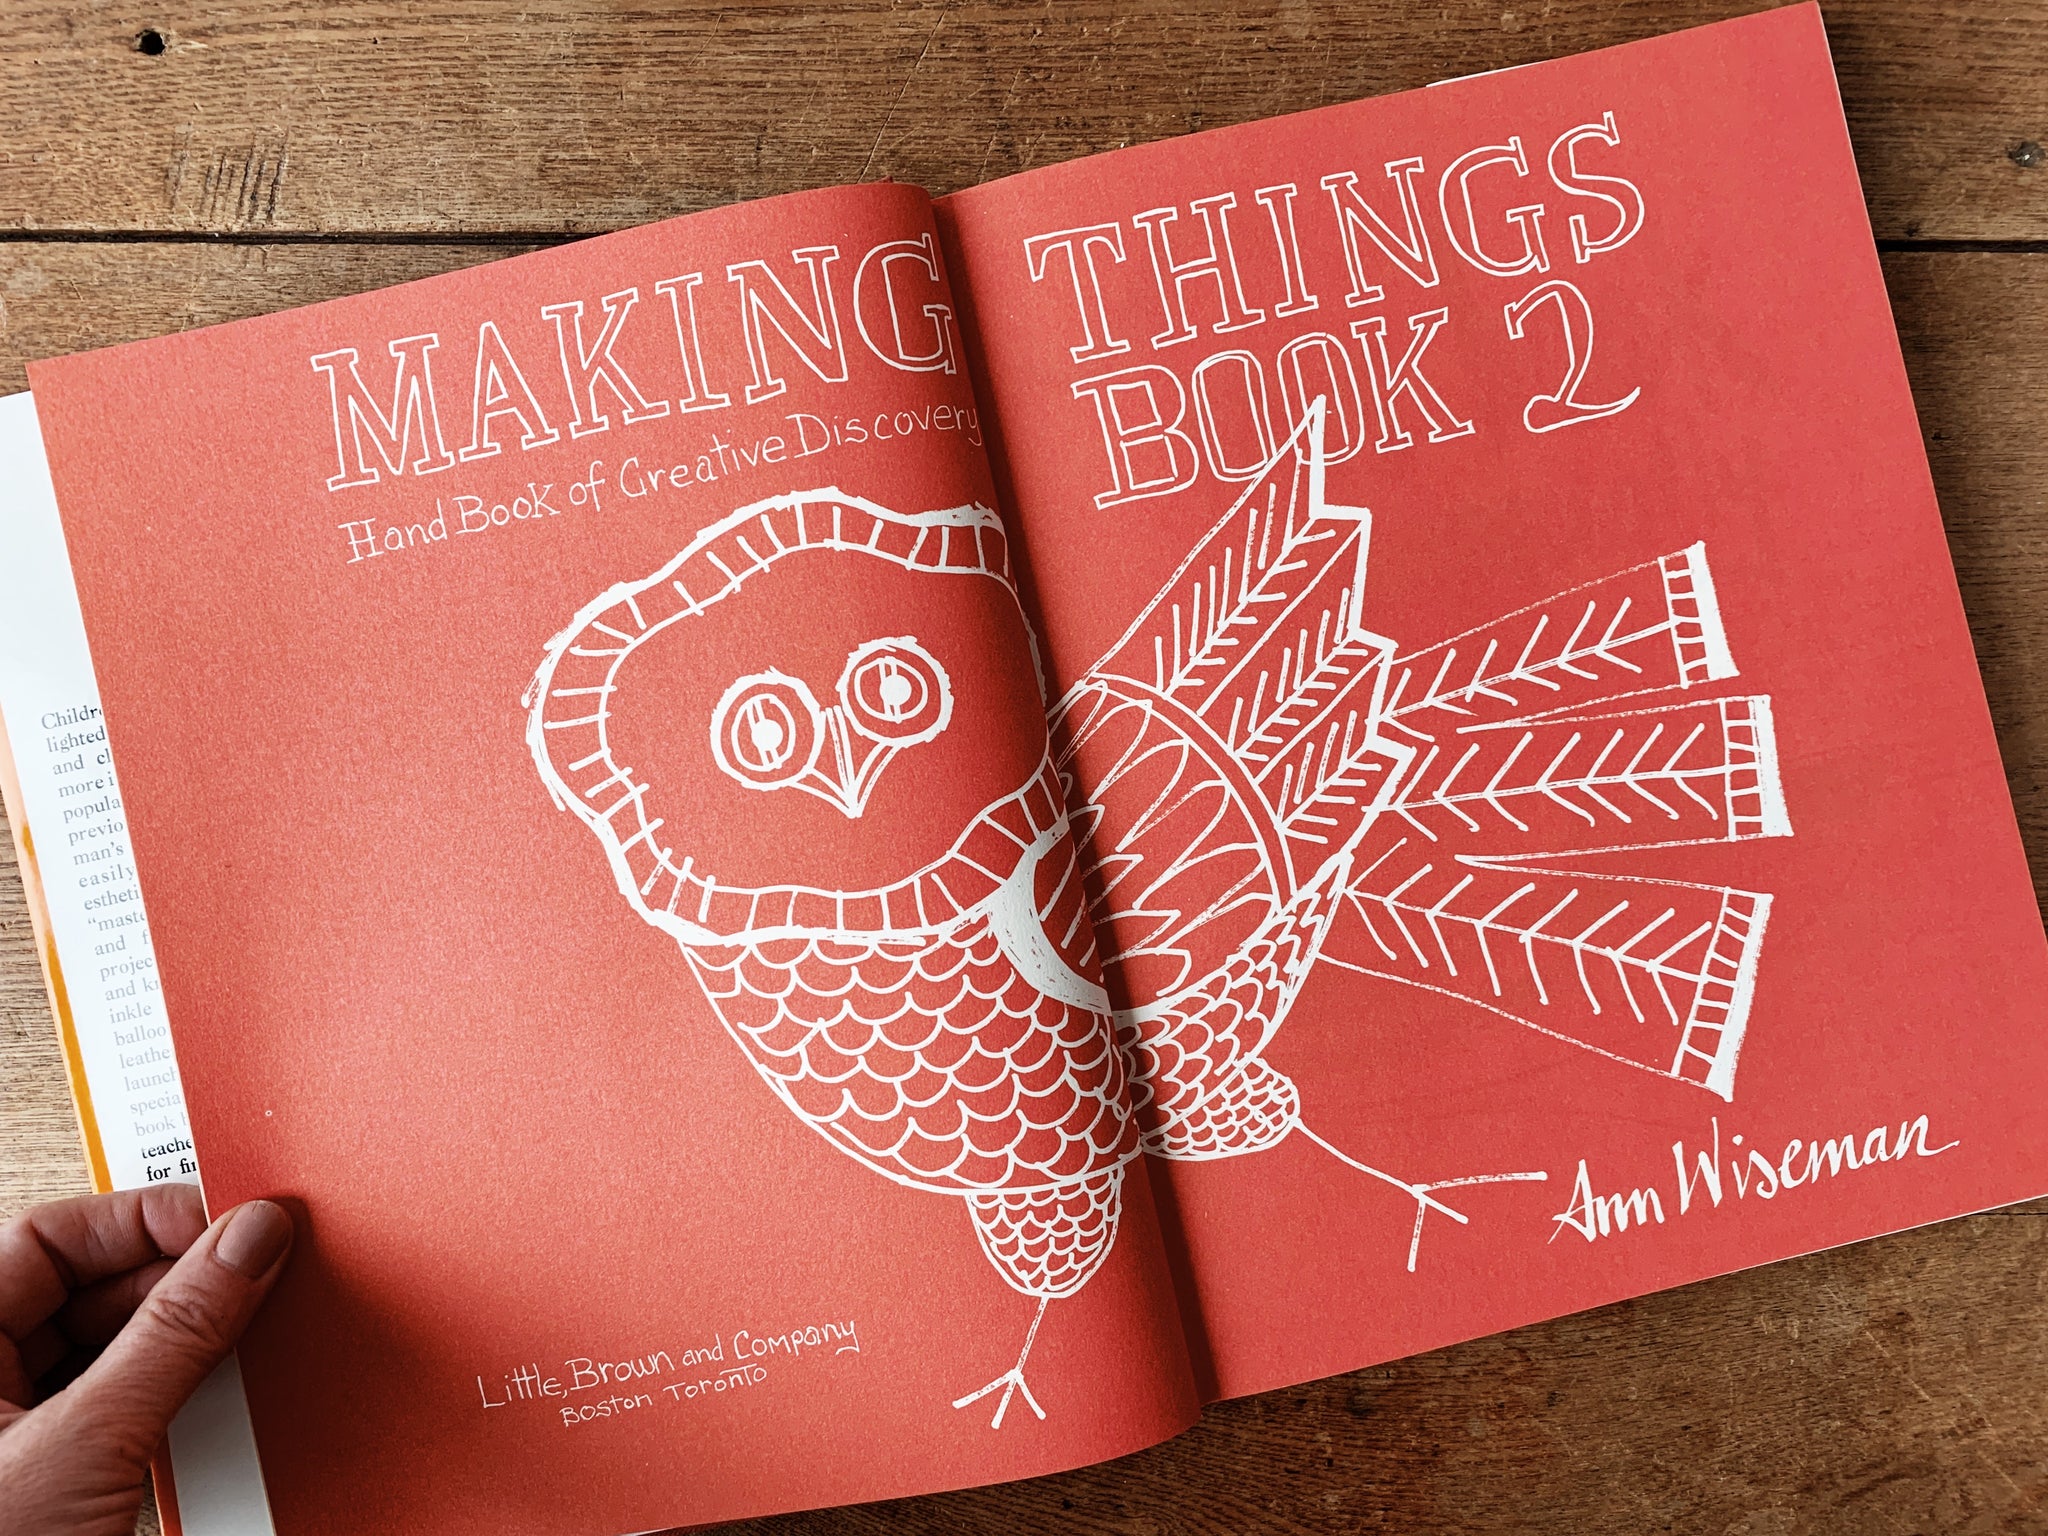 Making Things: A Handbook of Creative Discovery